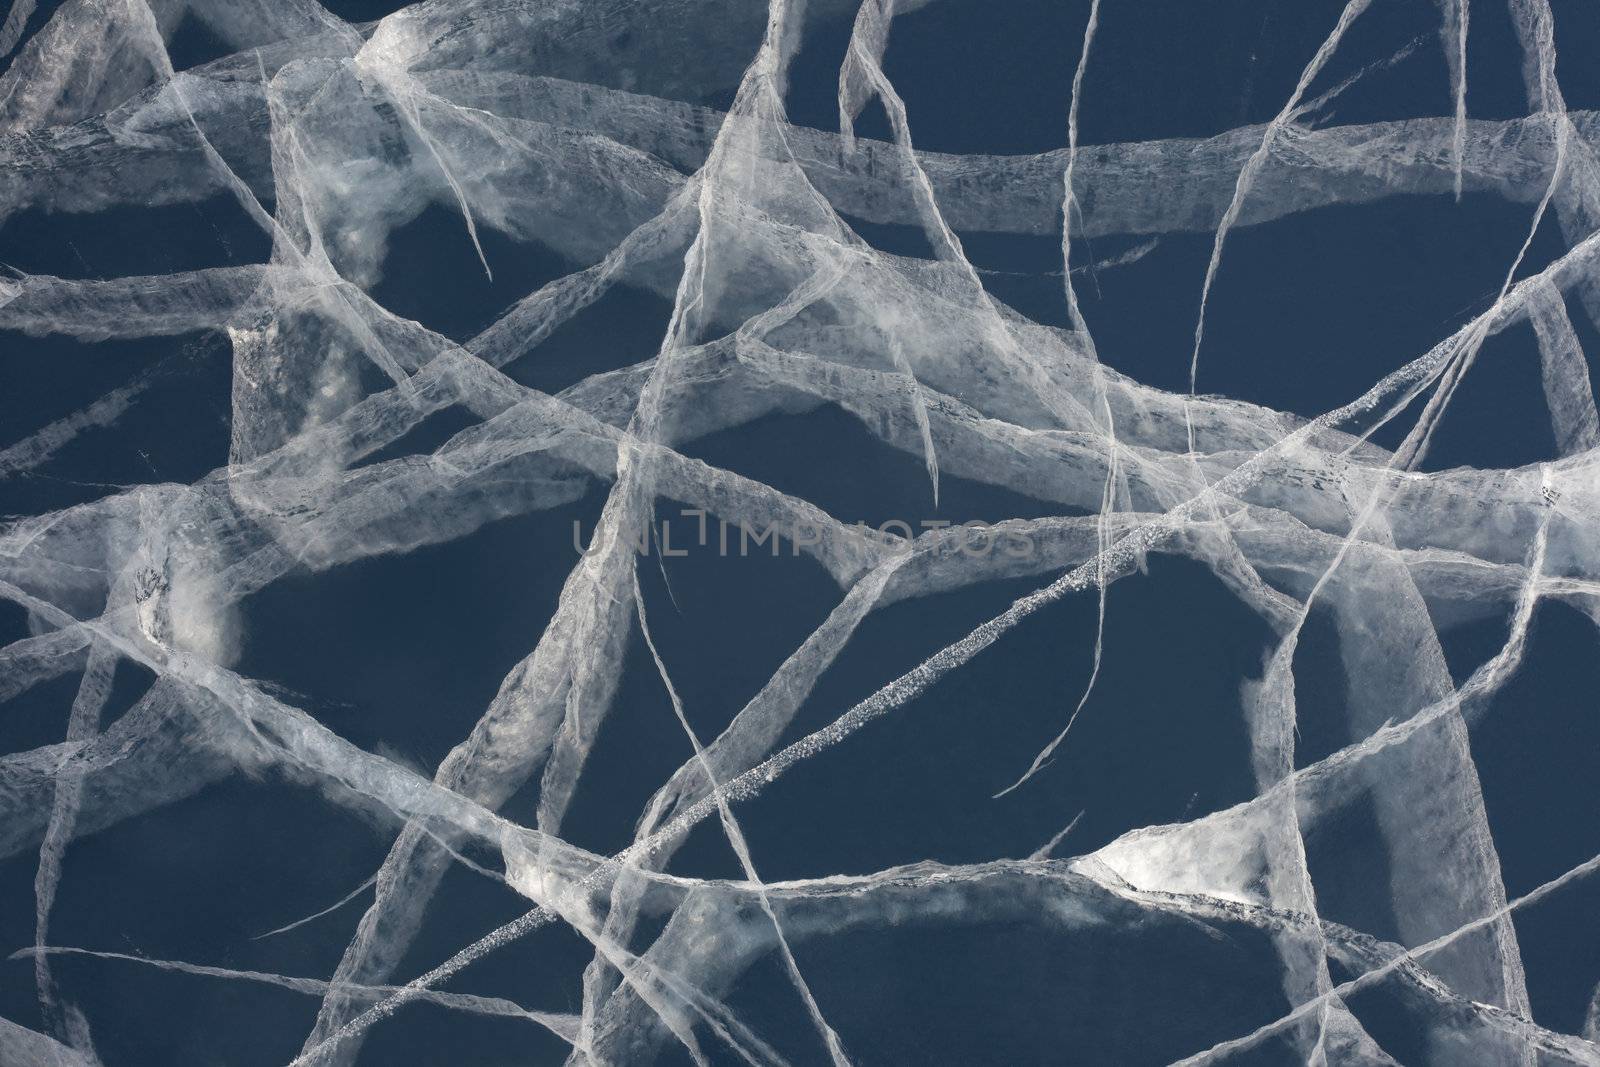 Spider web of tension cracks in thick layer of ice by PiLens